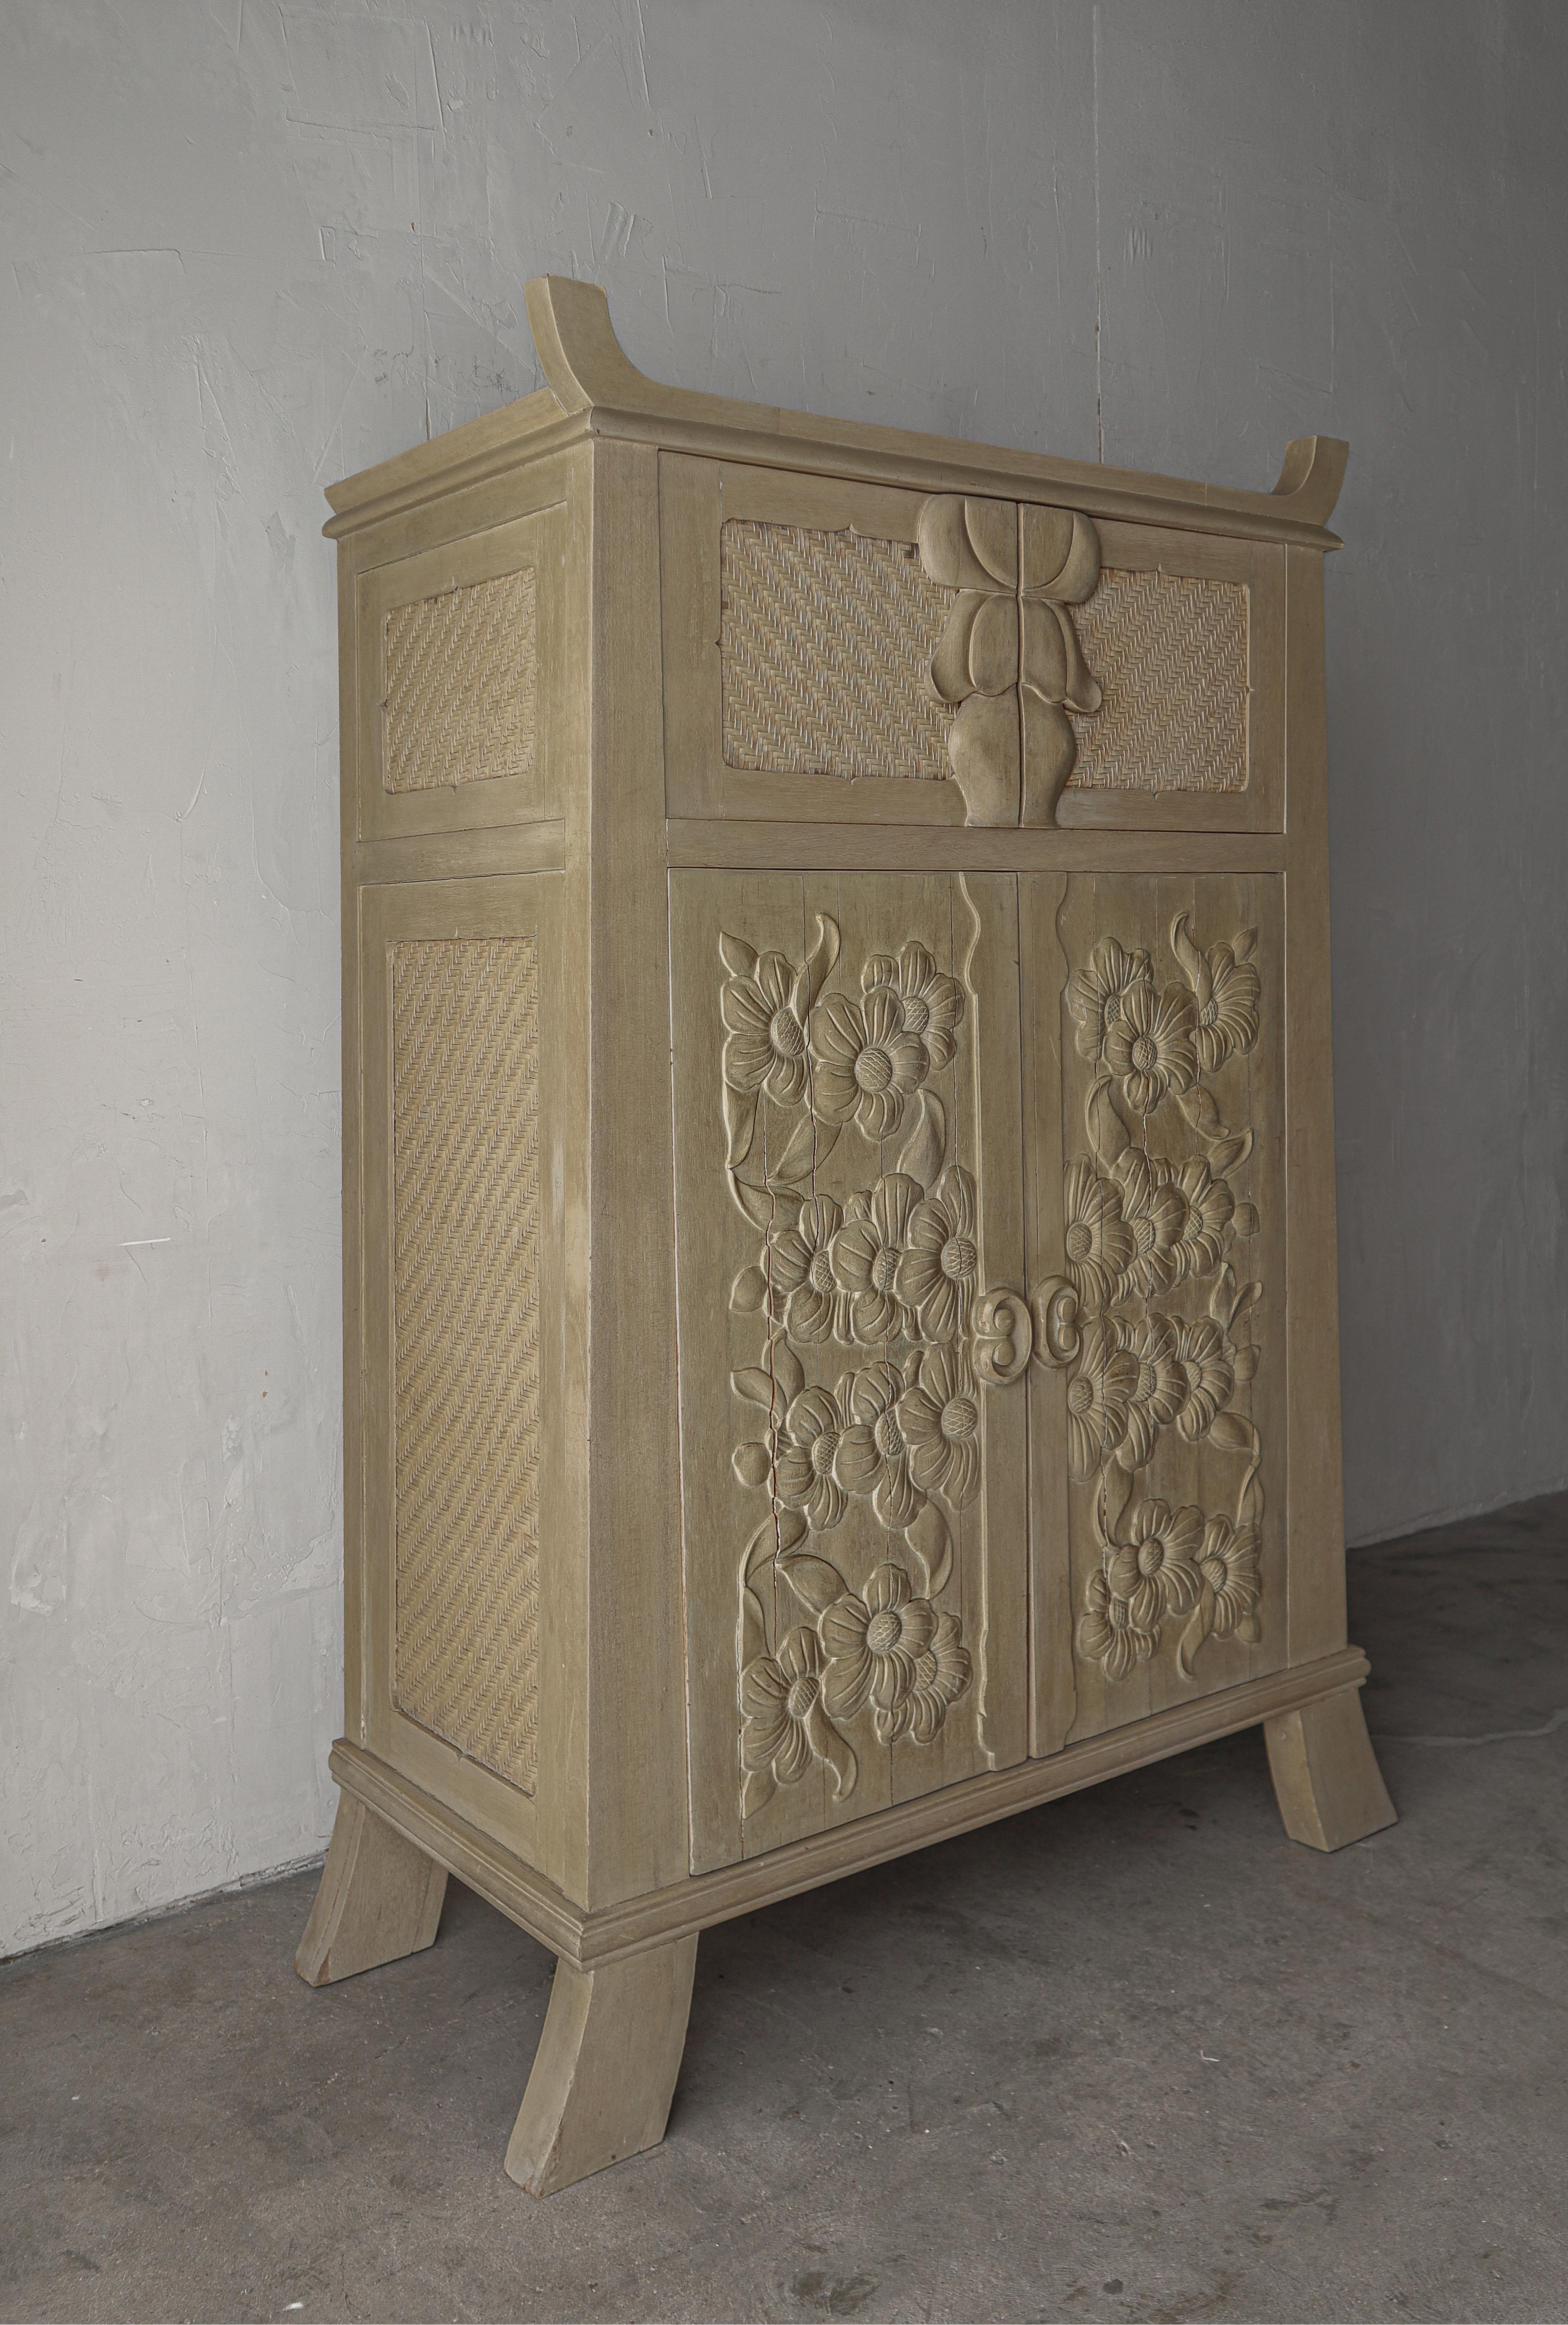 This vintage, hand carved wood relief cabinet is INCREDIBLE.  So unique I have been unable to find another example of any kind.  Everything from the beautifully carved floral motif to the woven leather panels.  A unique, intricate and gorgeous